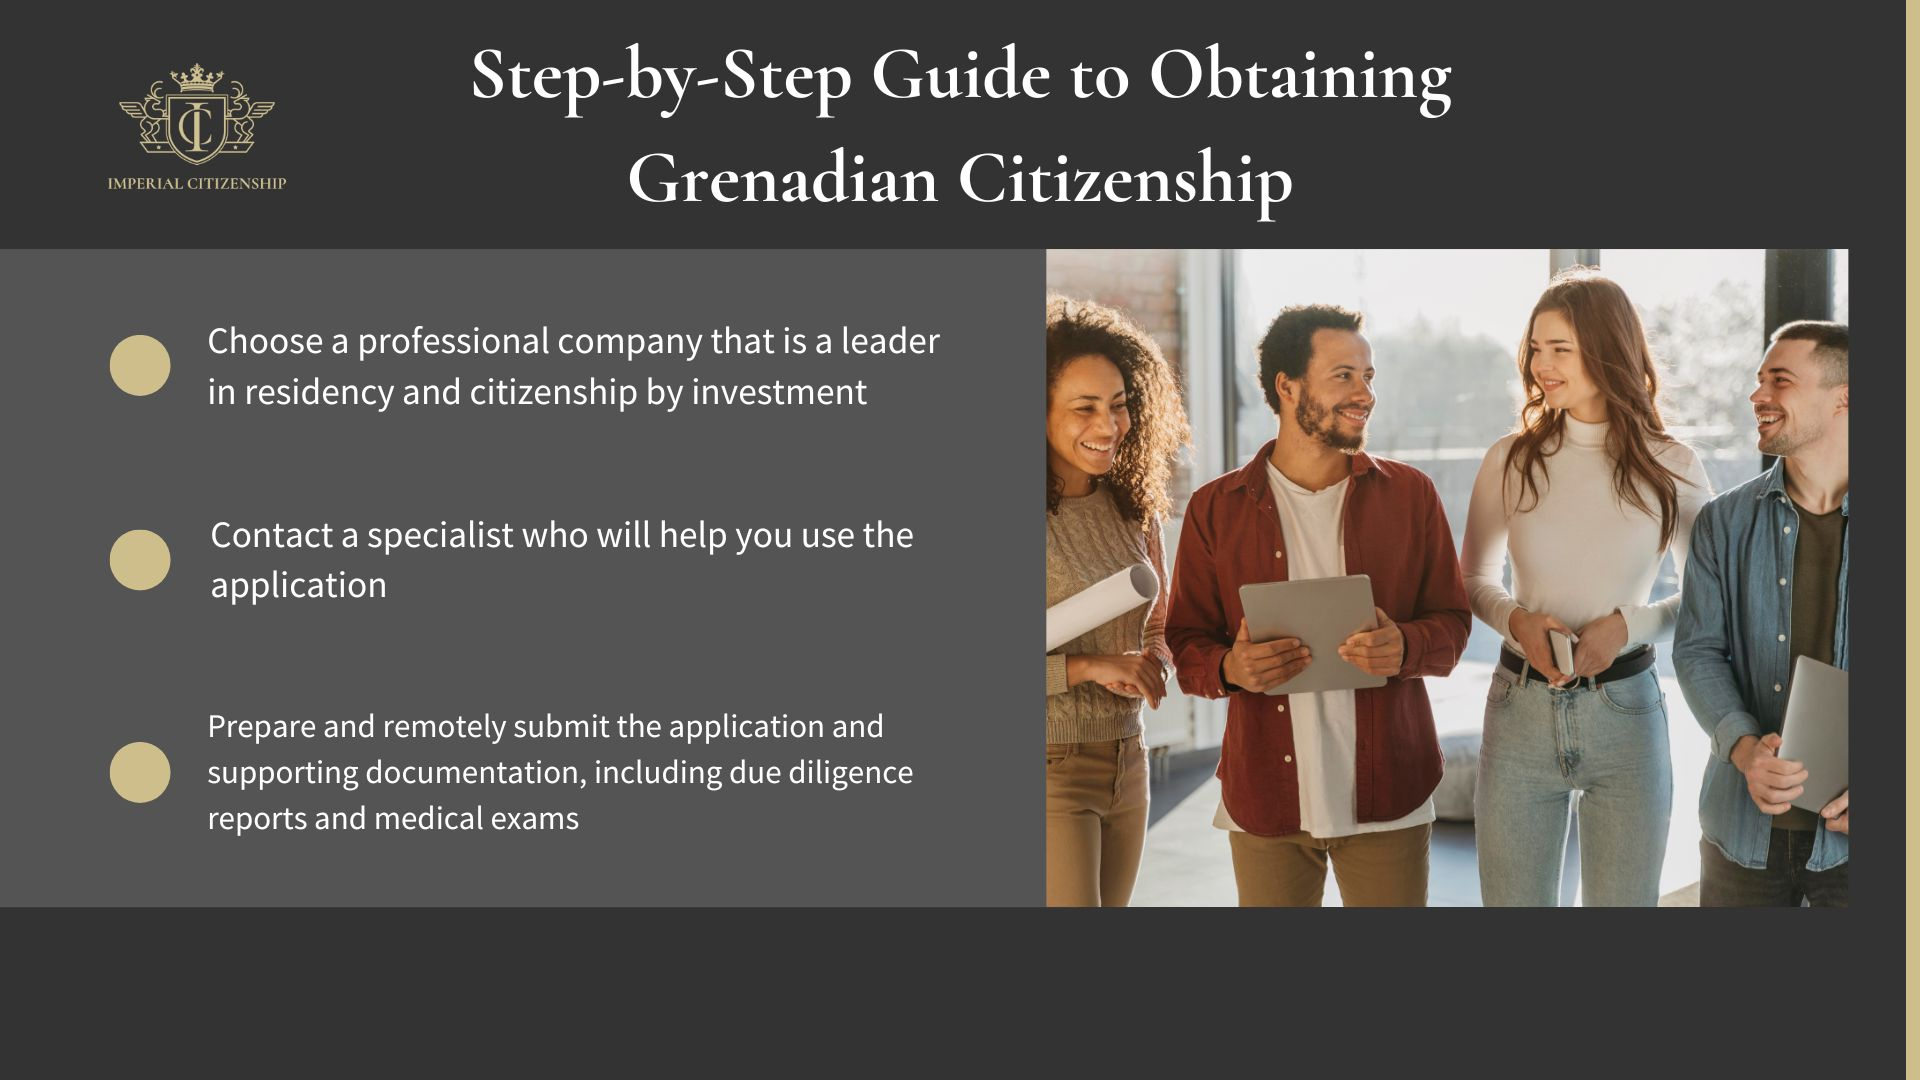 Guide to Obtaining Grenadian Citizenship